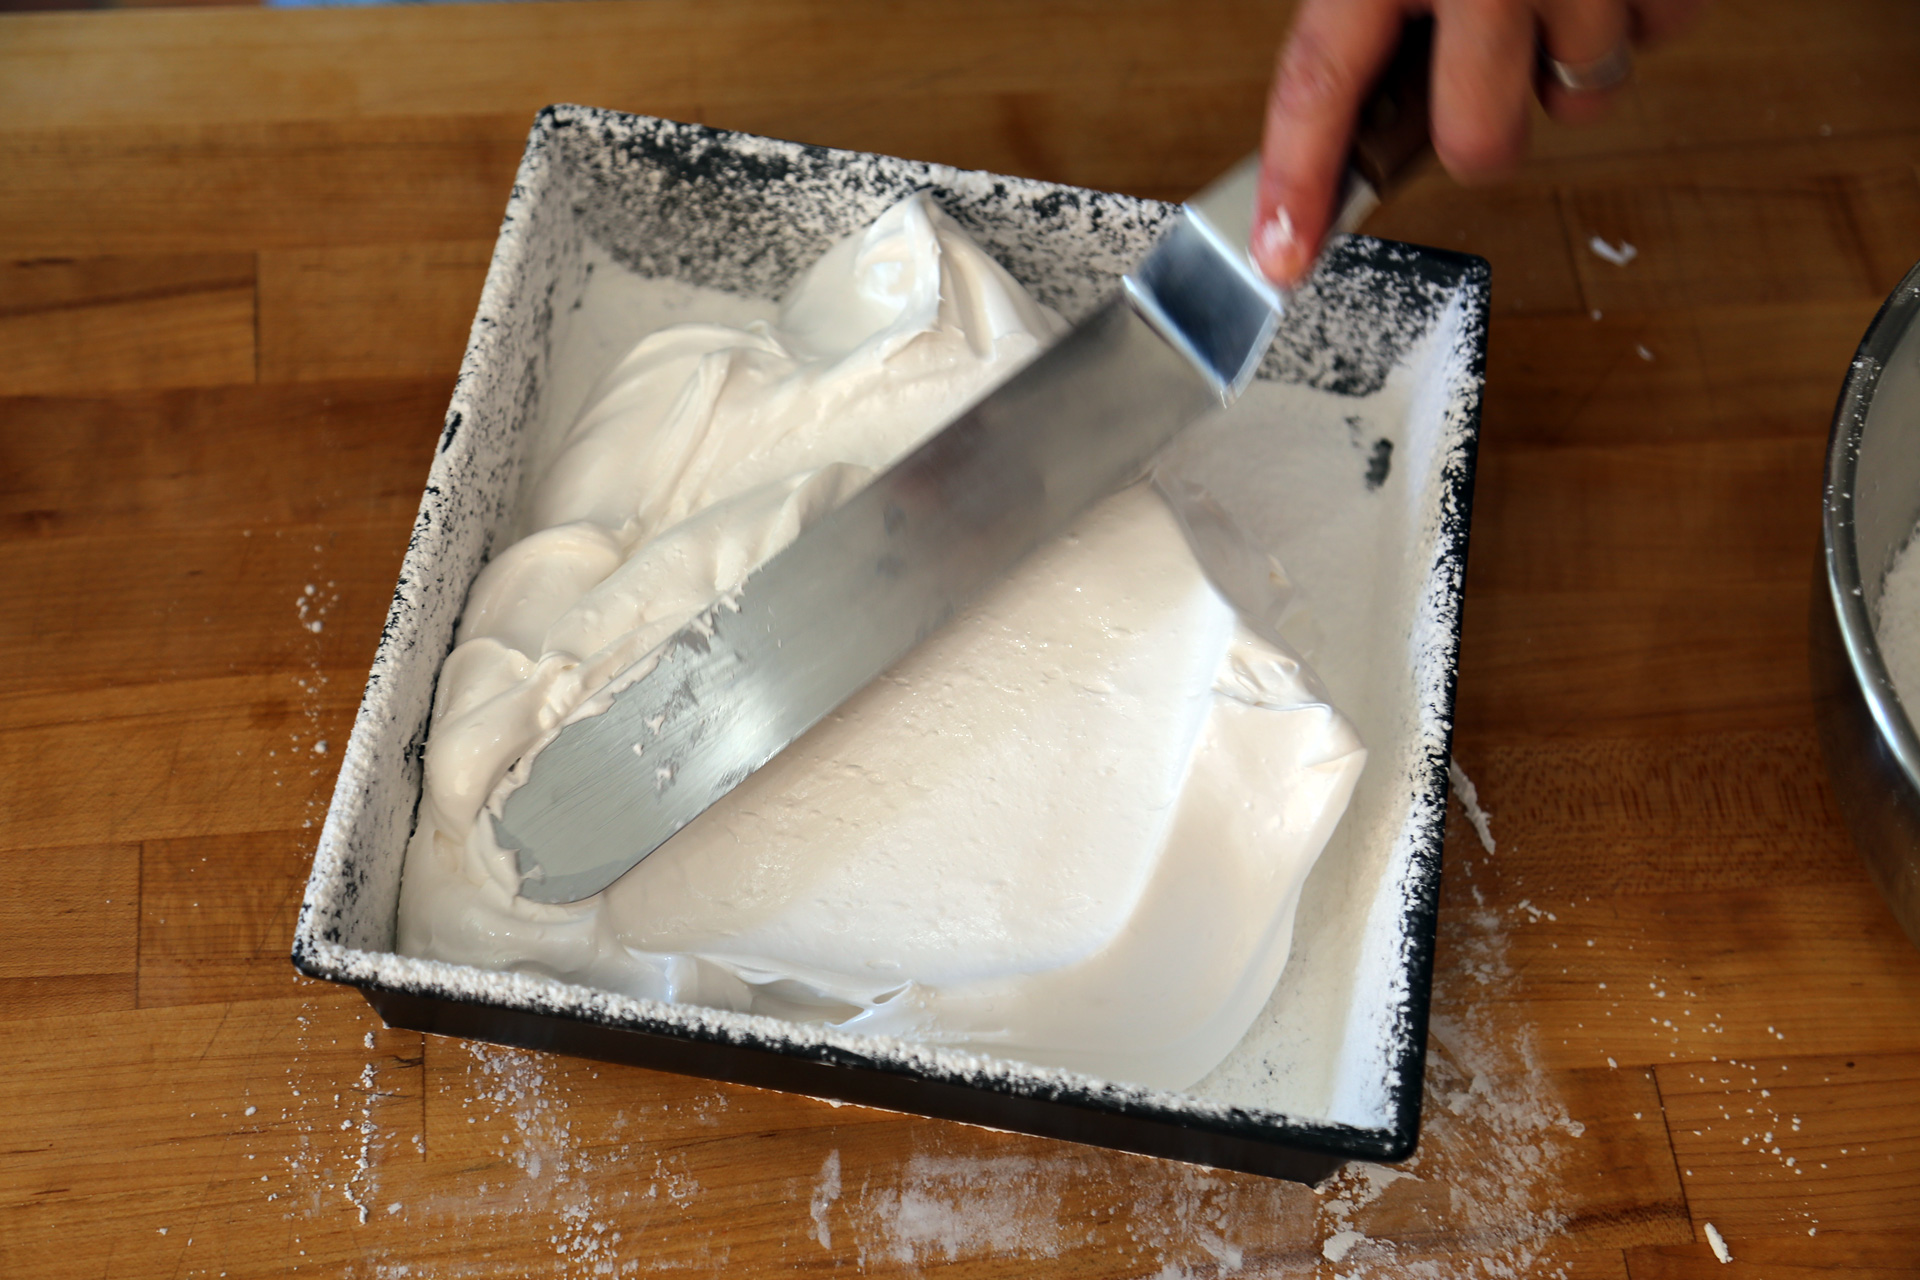 Then, using a lightly oiled offset metal spatula, spread the mixture into an even layer.